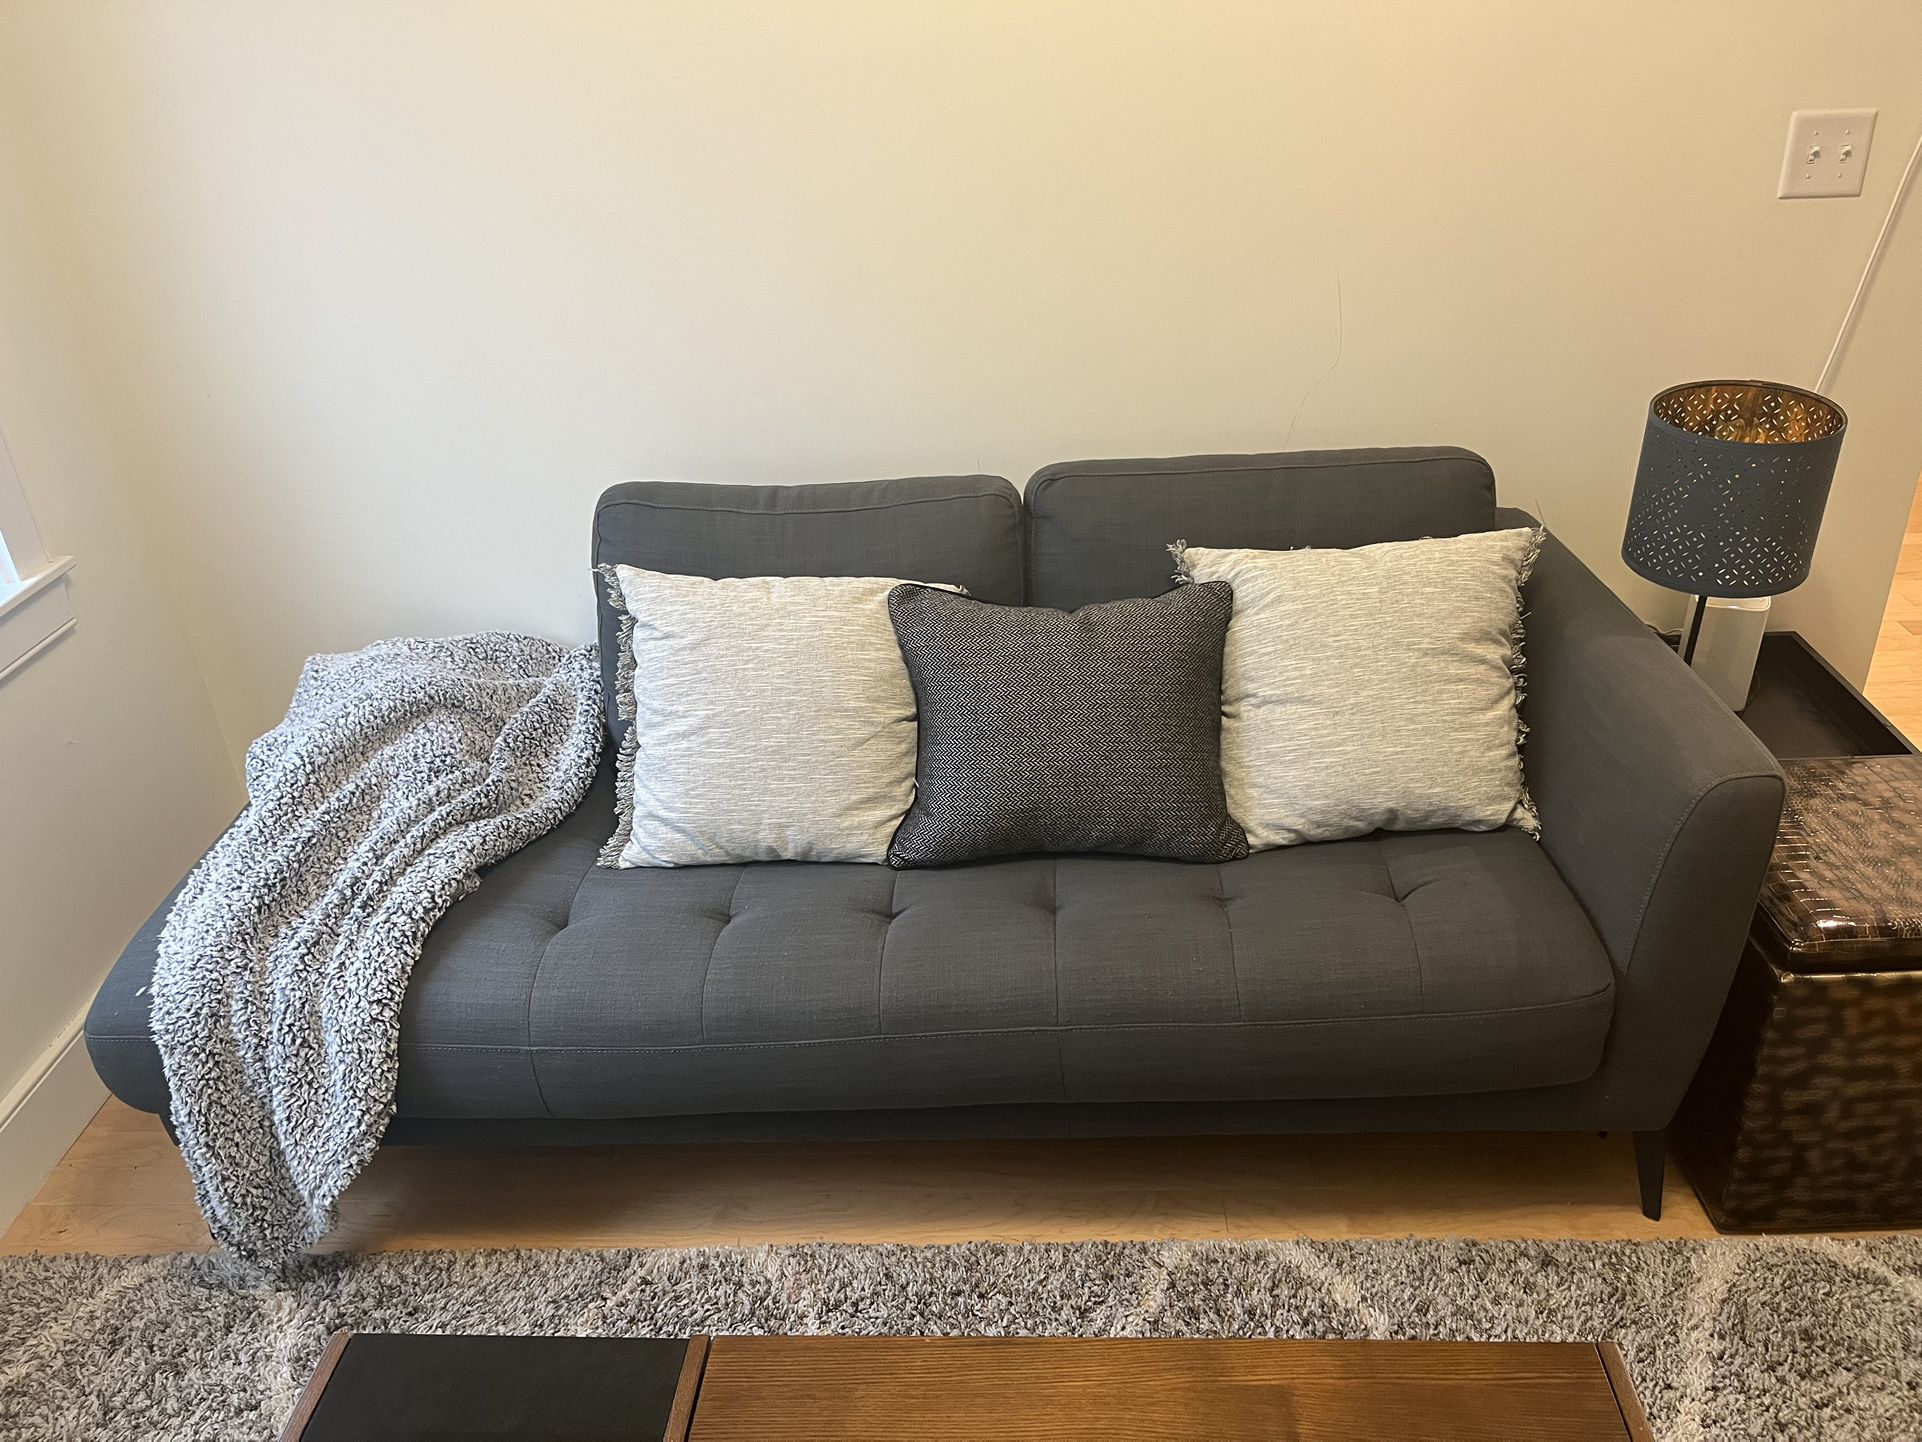 Blue/Grey Midcentury Modern Couch - MUST GO